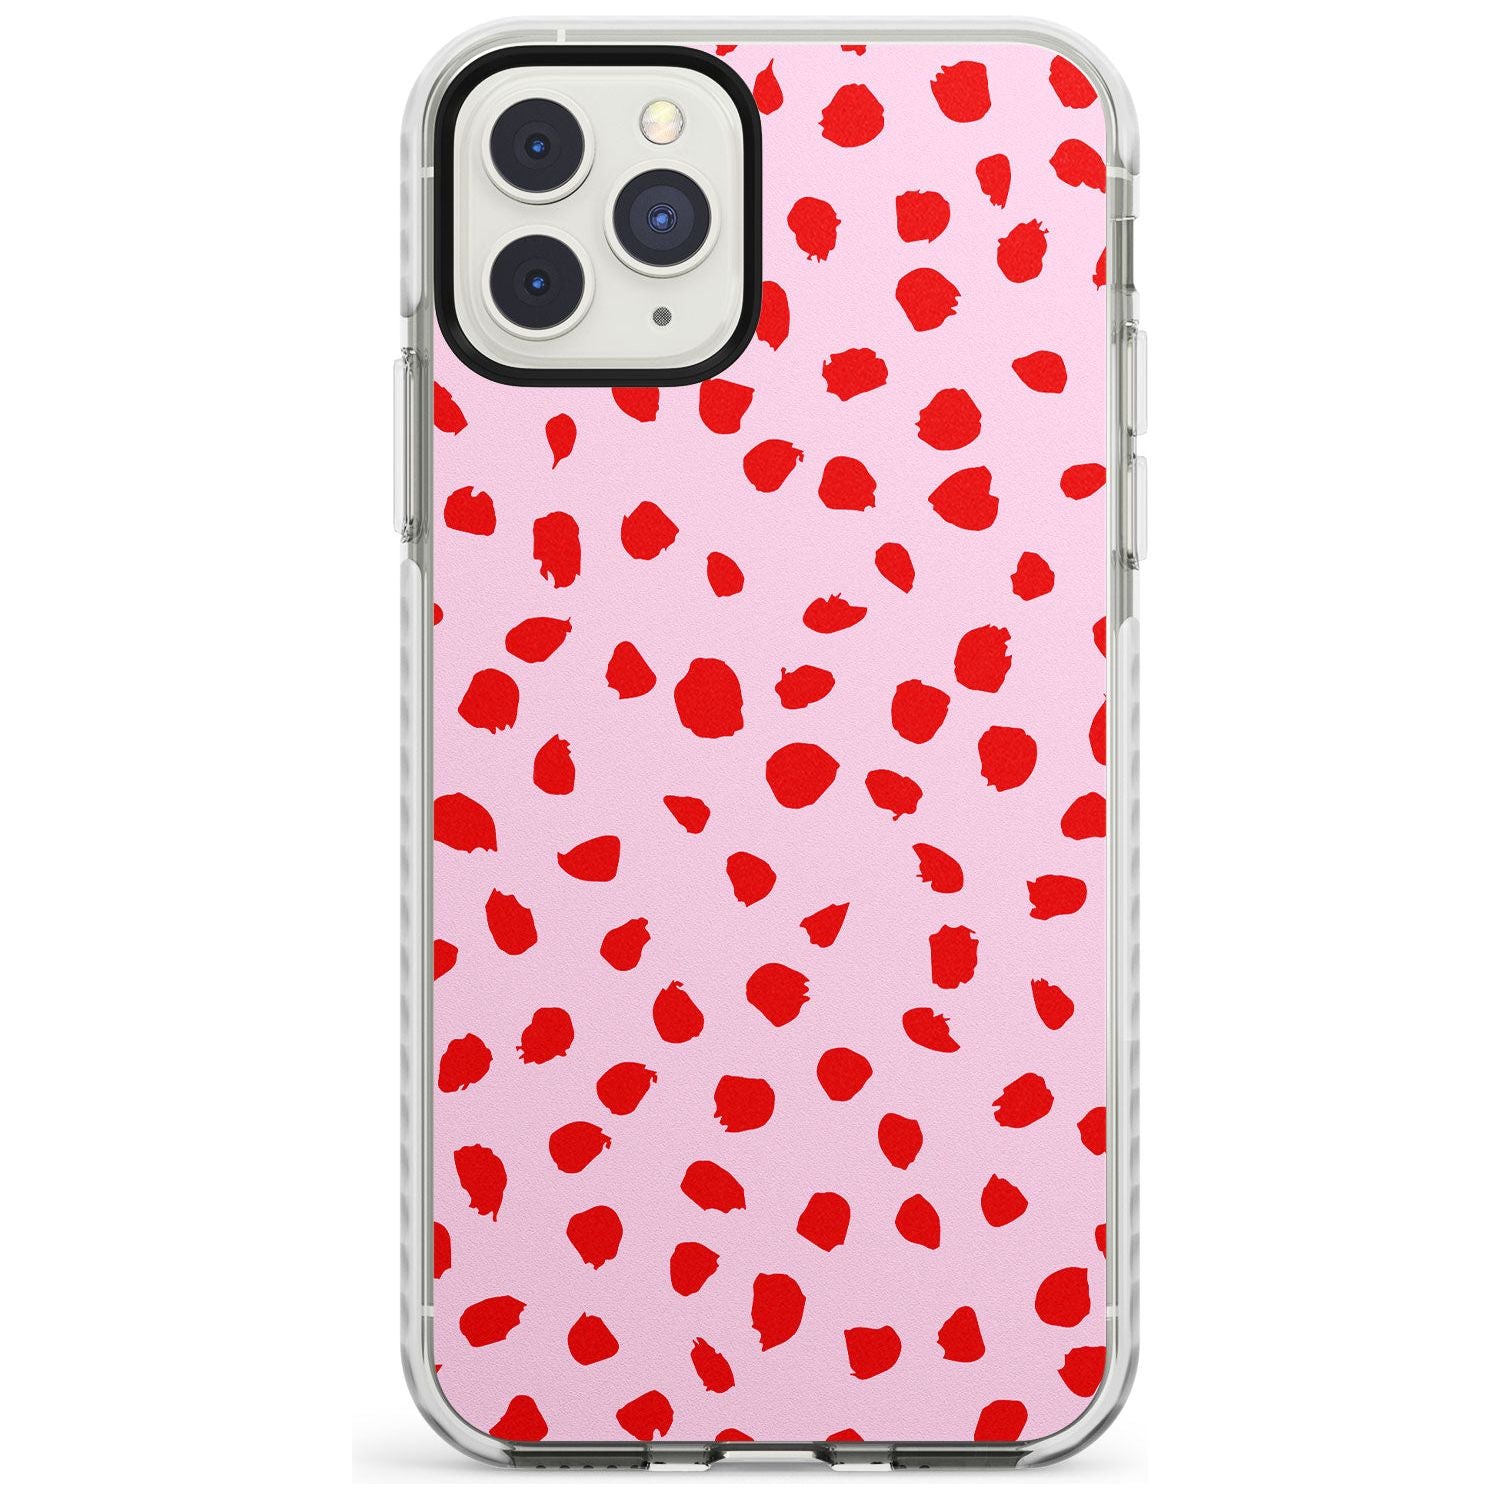 Red on Pink Dalmatian Polka Dot Spots Impact Phone Case for iPhone 11 Pro Max